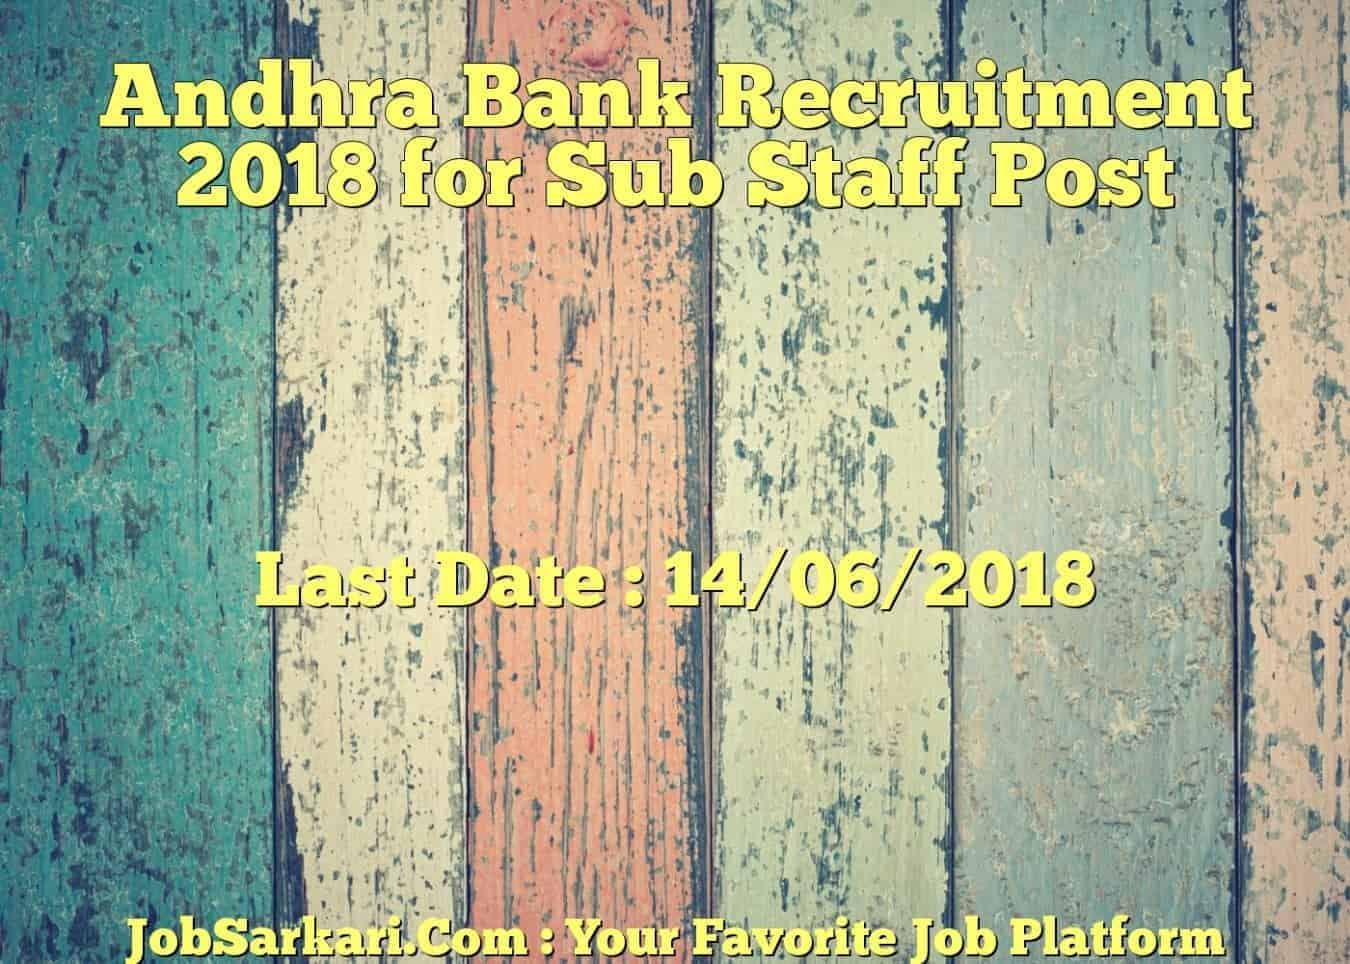 Andhra Bank Recruitment 2018 for Sub Staff Post